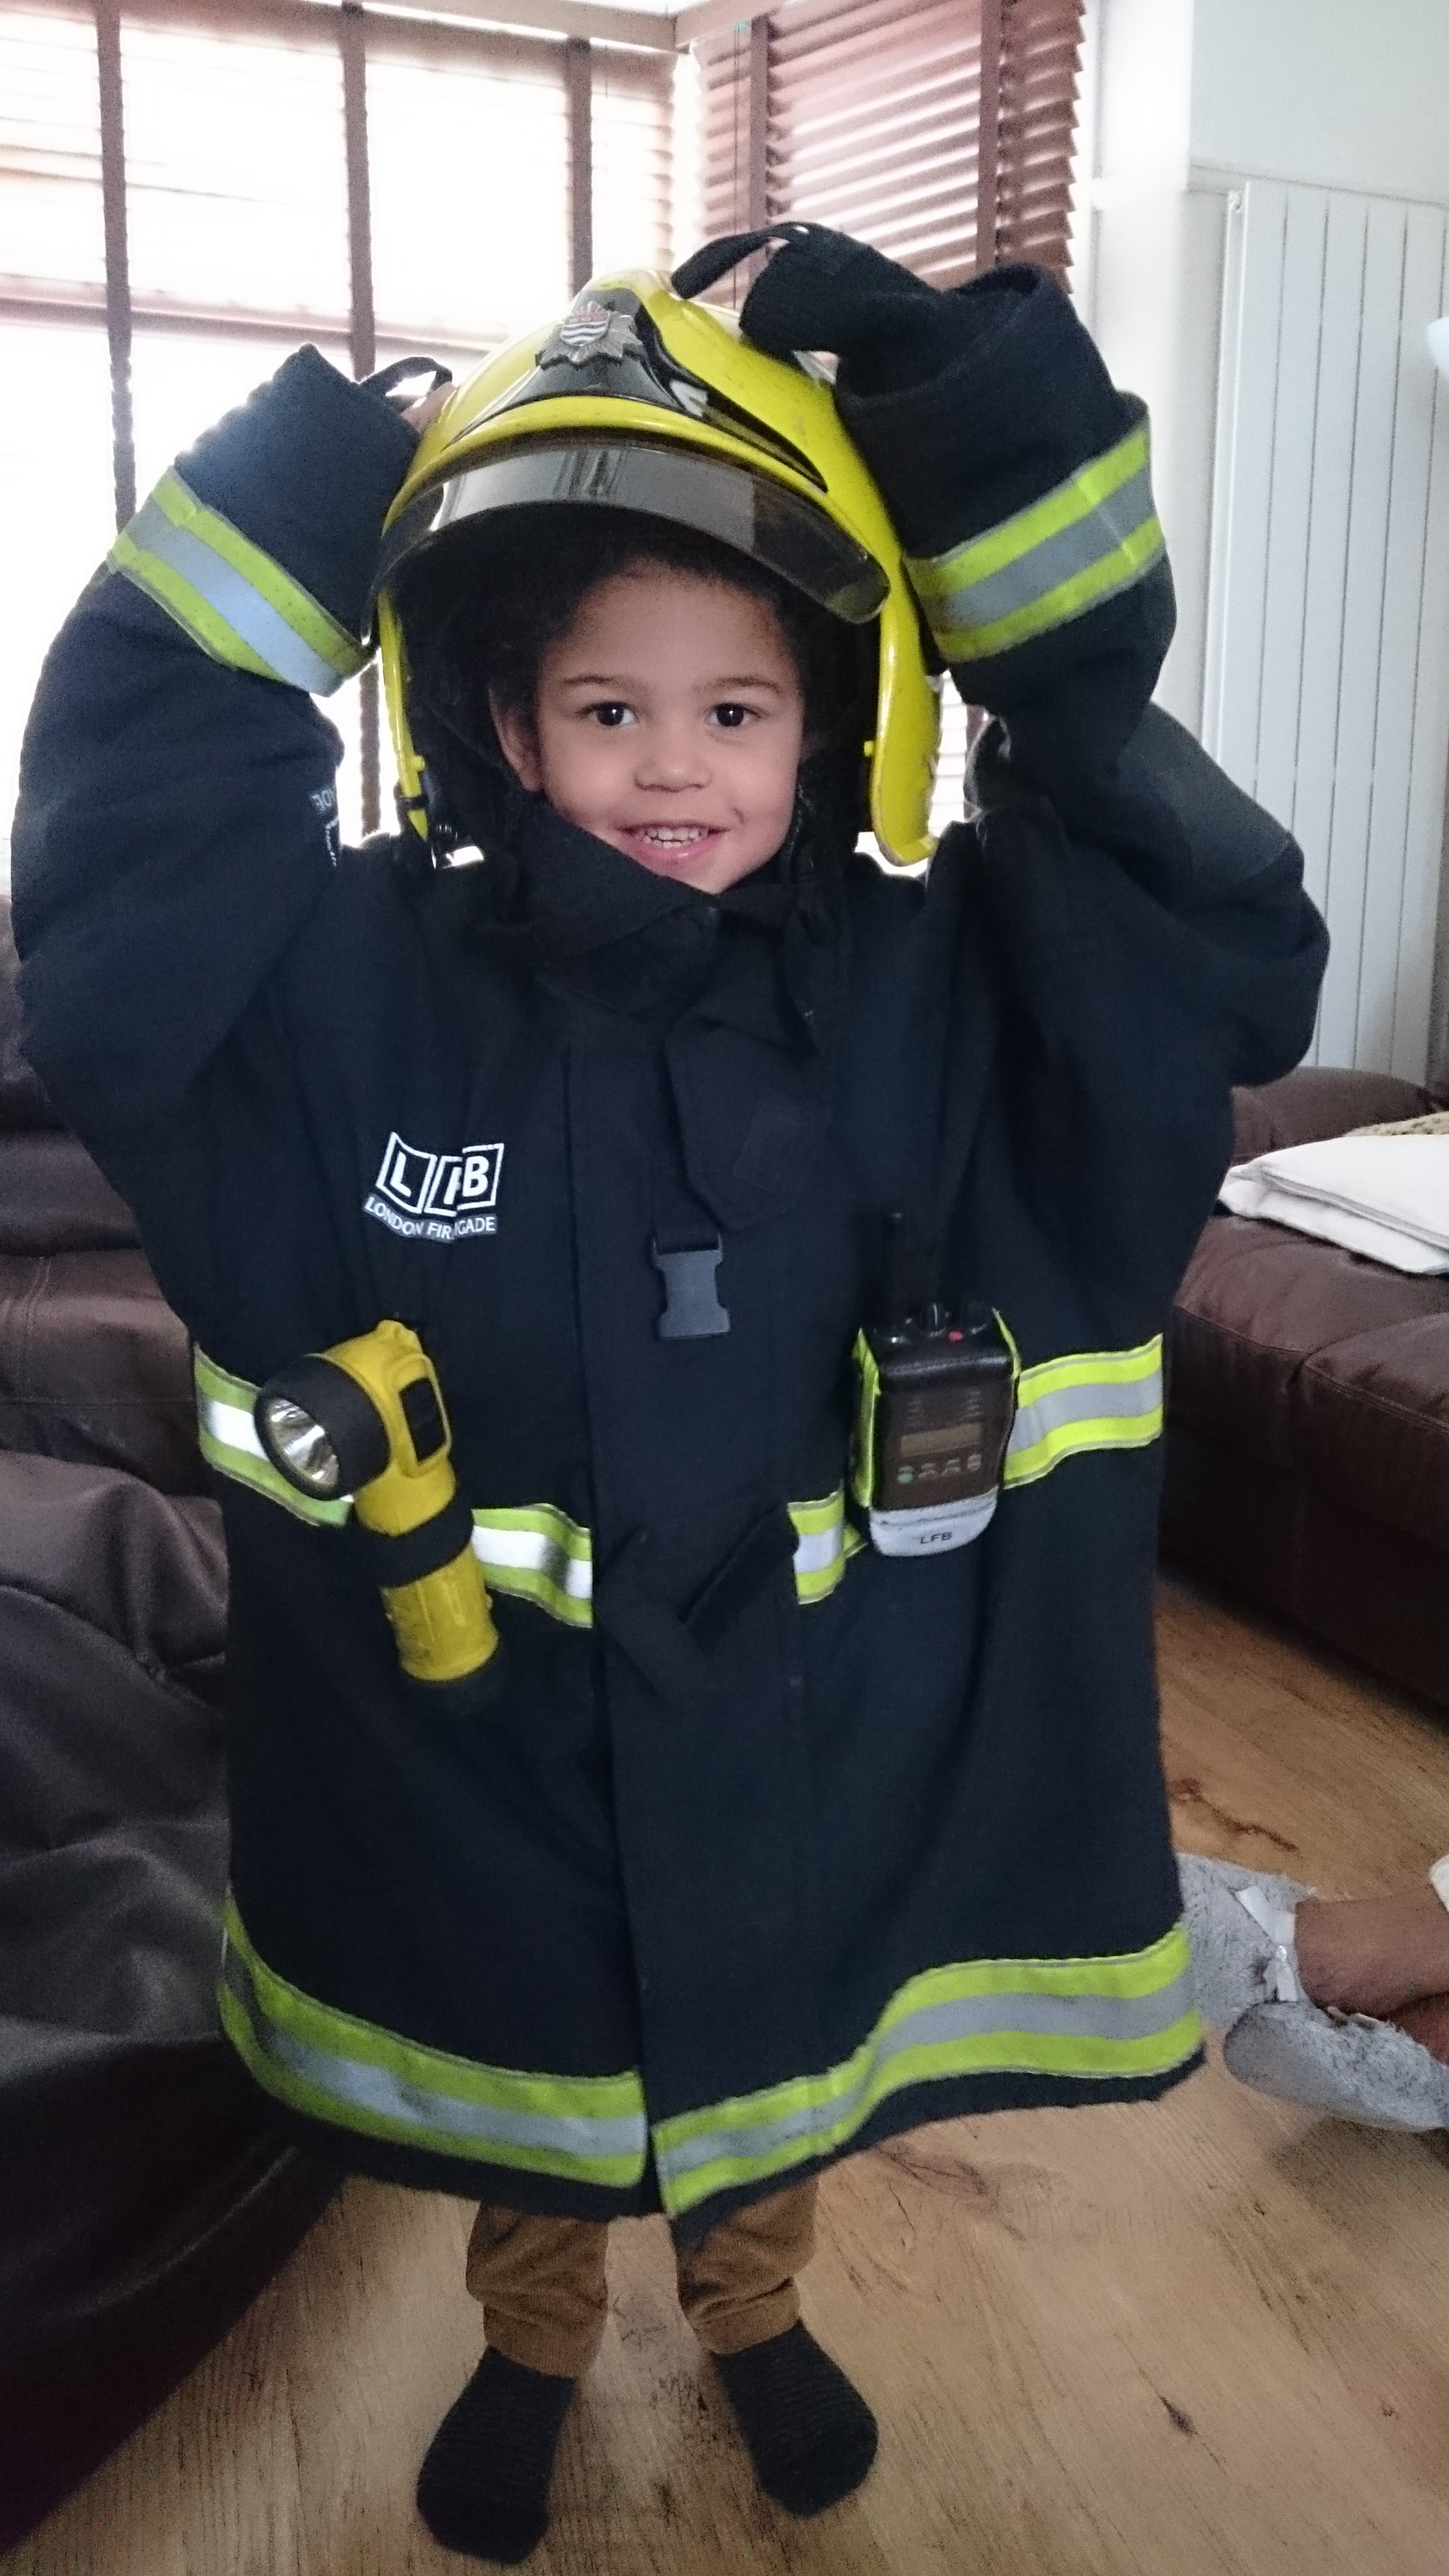 Tommy dressed up in his dad's firefighter uniform